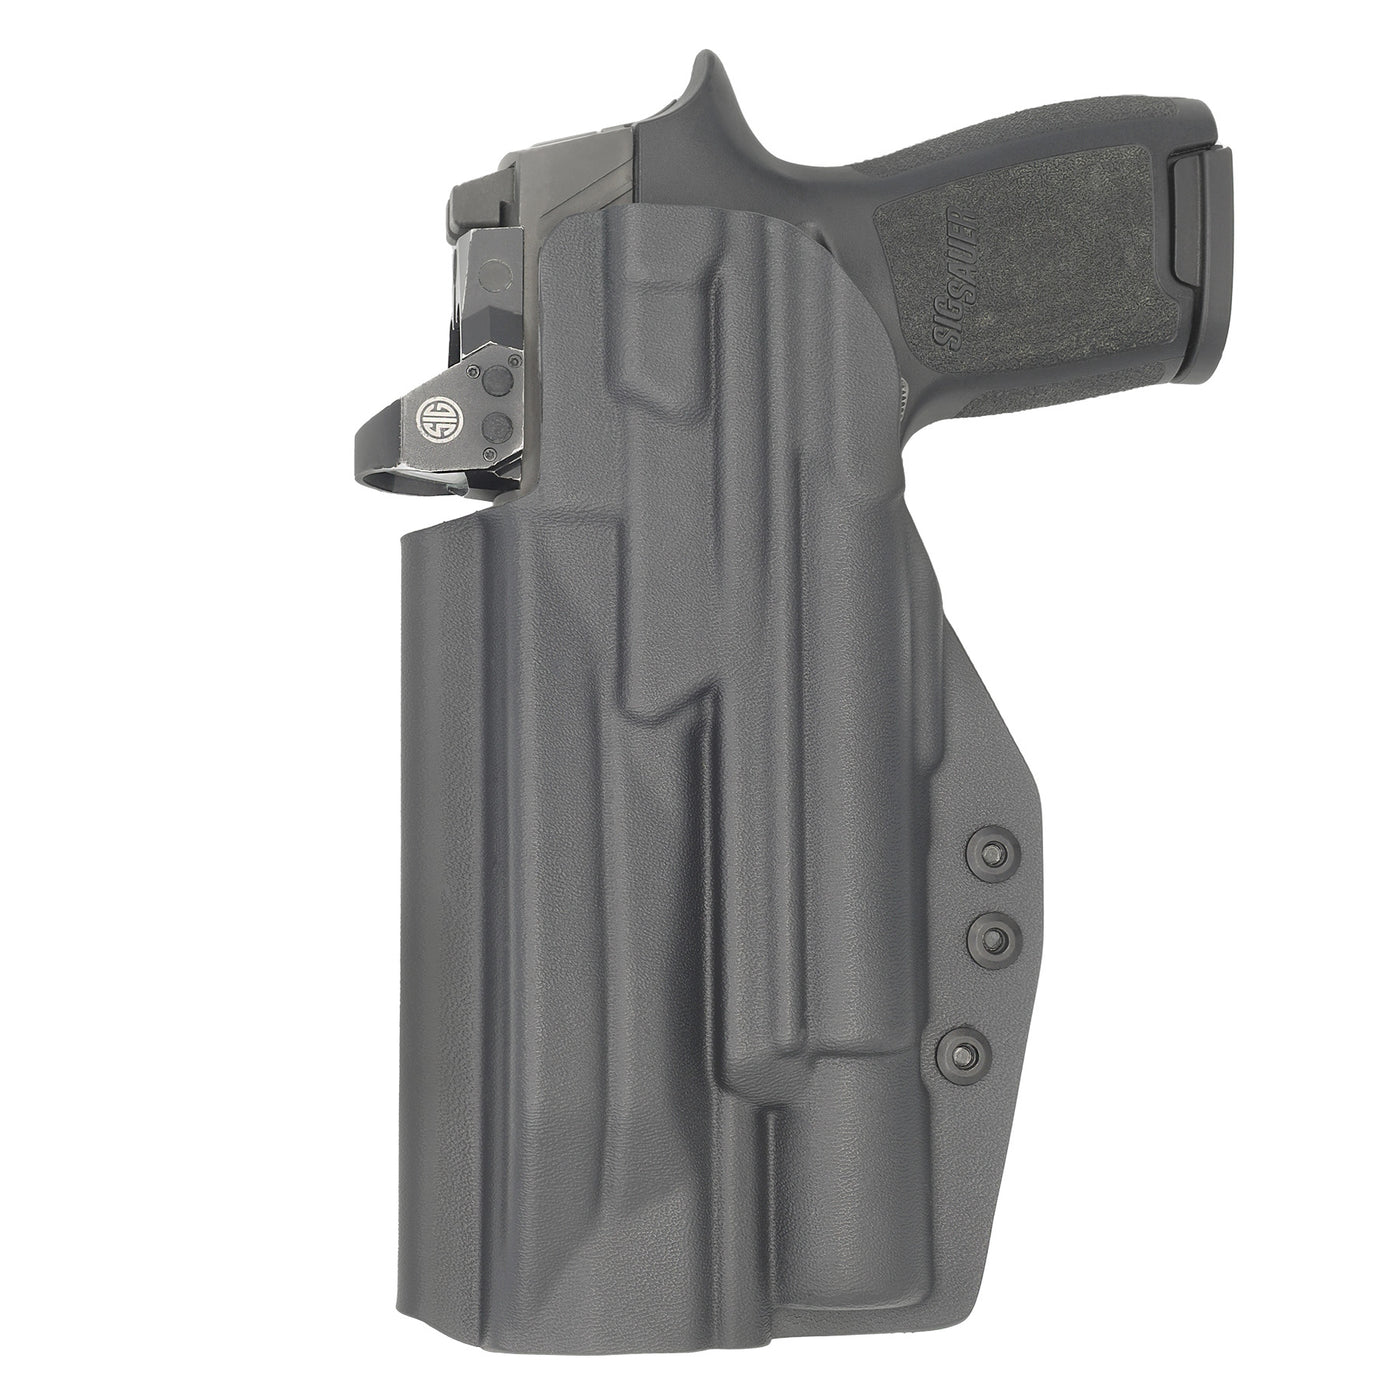 C&G holsters Quickship IWB Tactical Masada Surefire X300 in holstered position back view